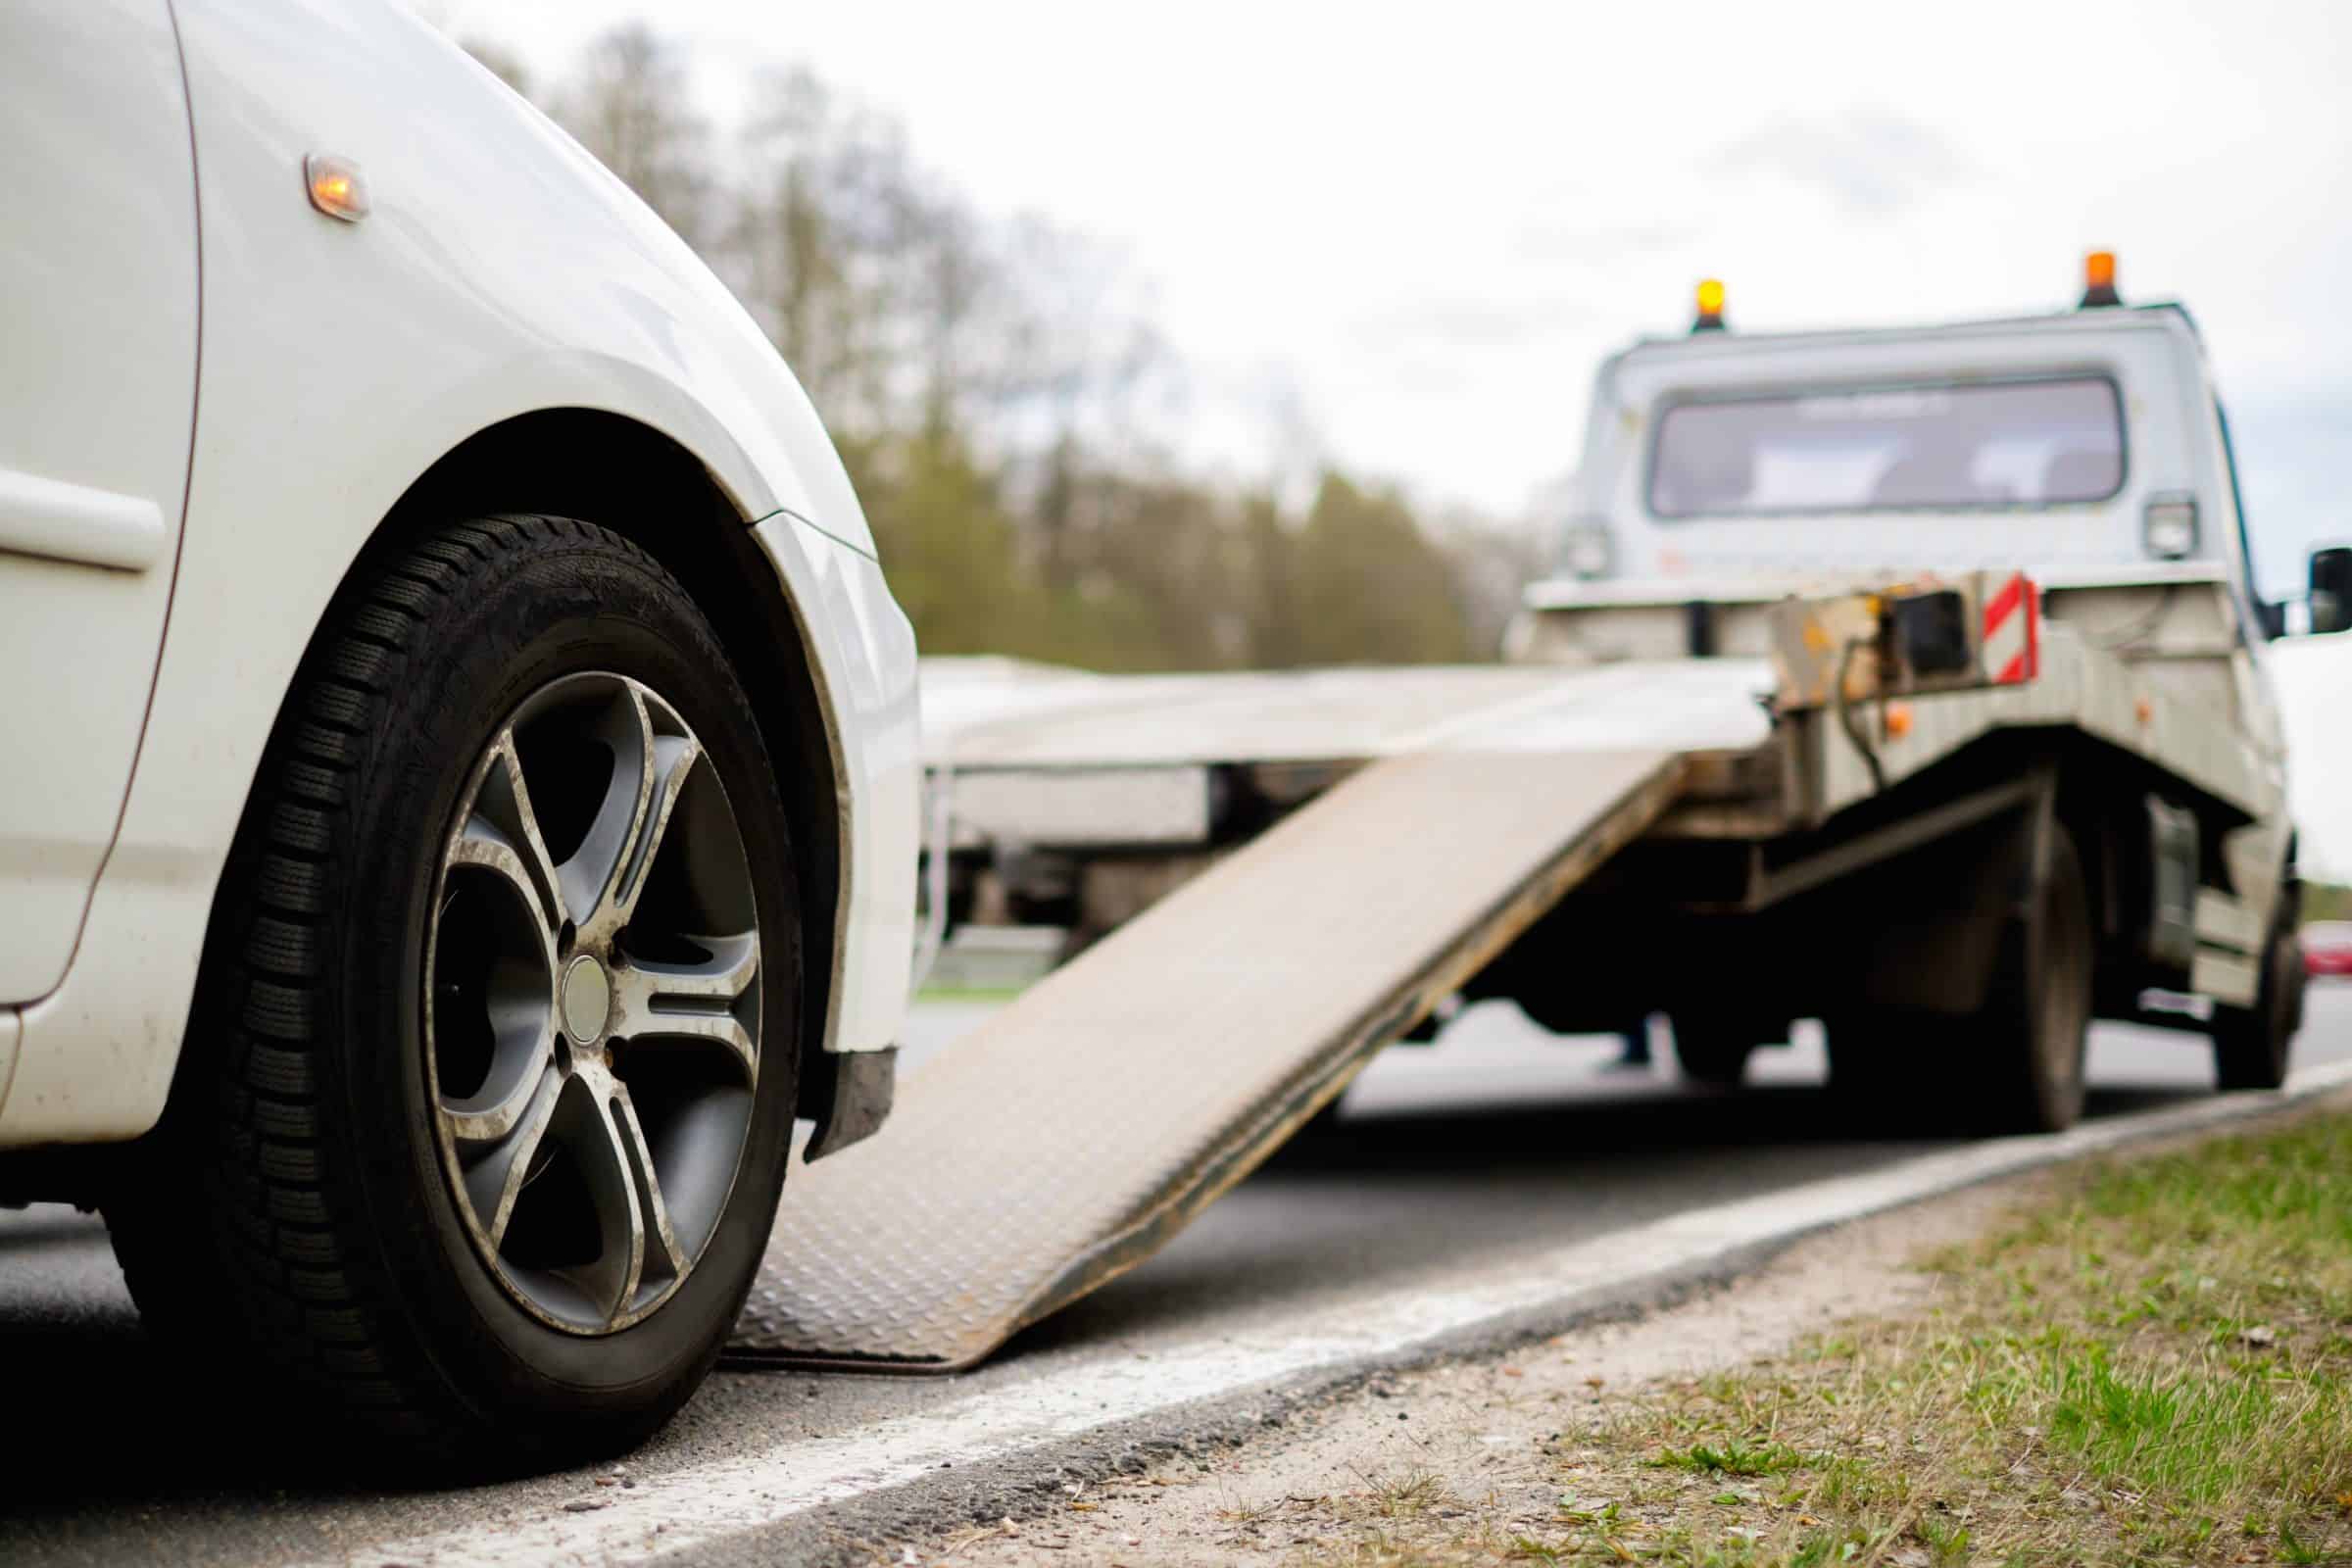 Long Distance Towing | Roadside Assistance in New York NY Area